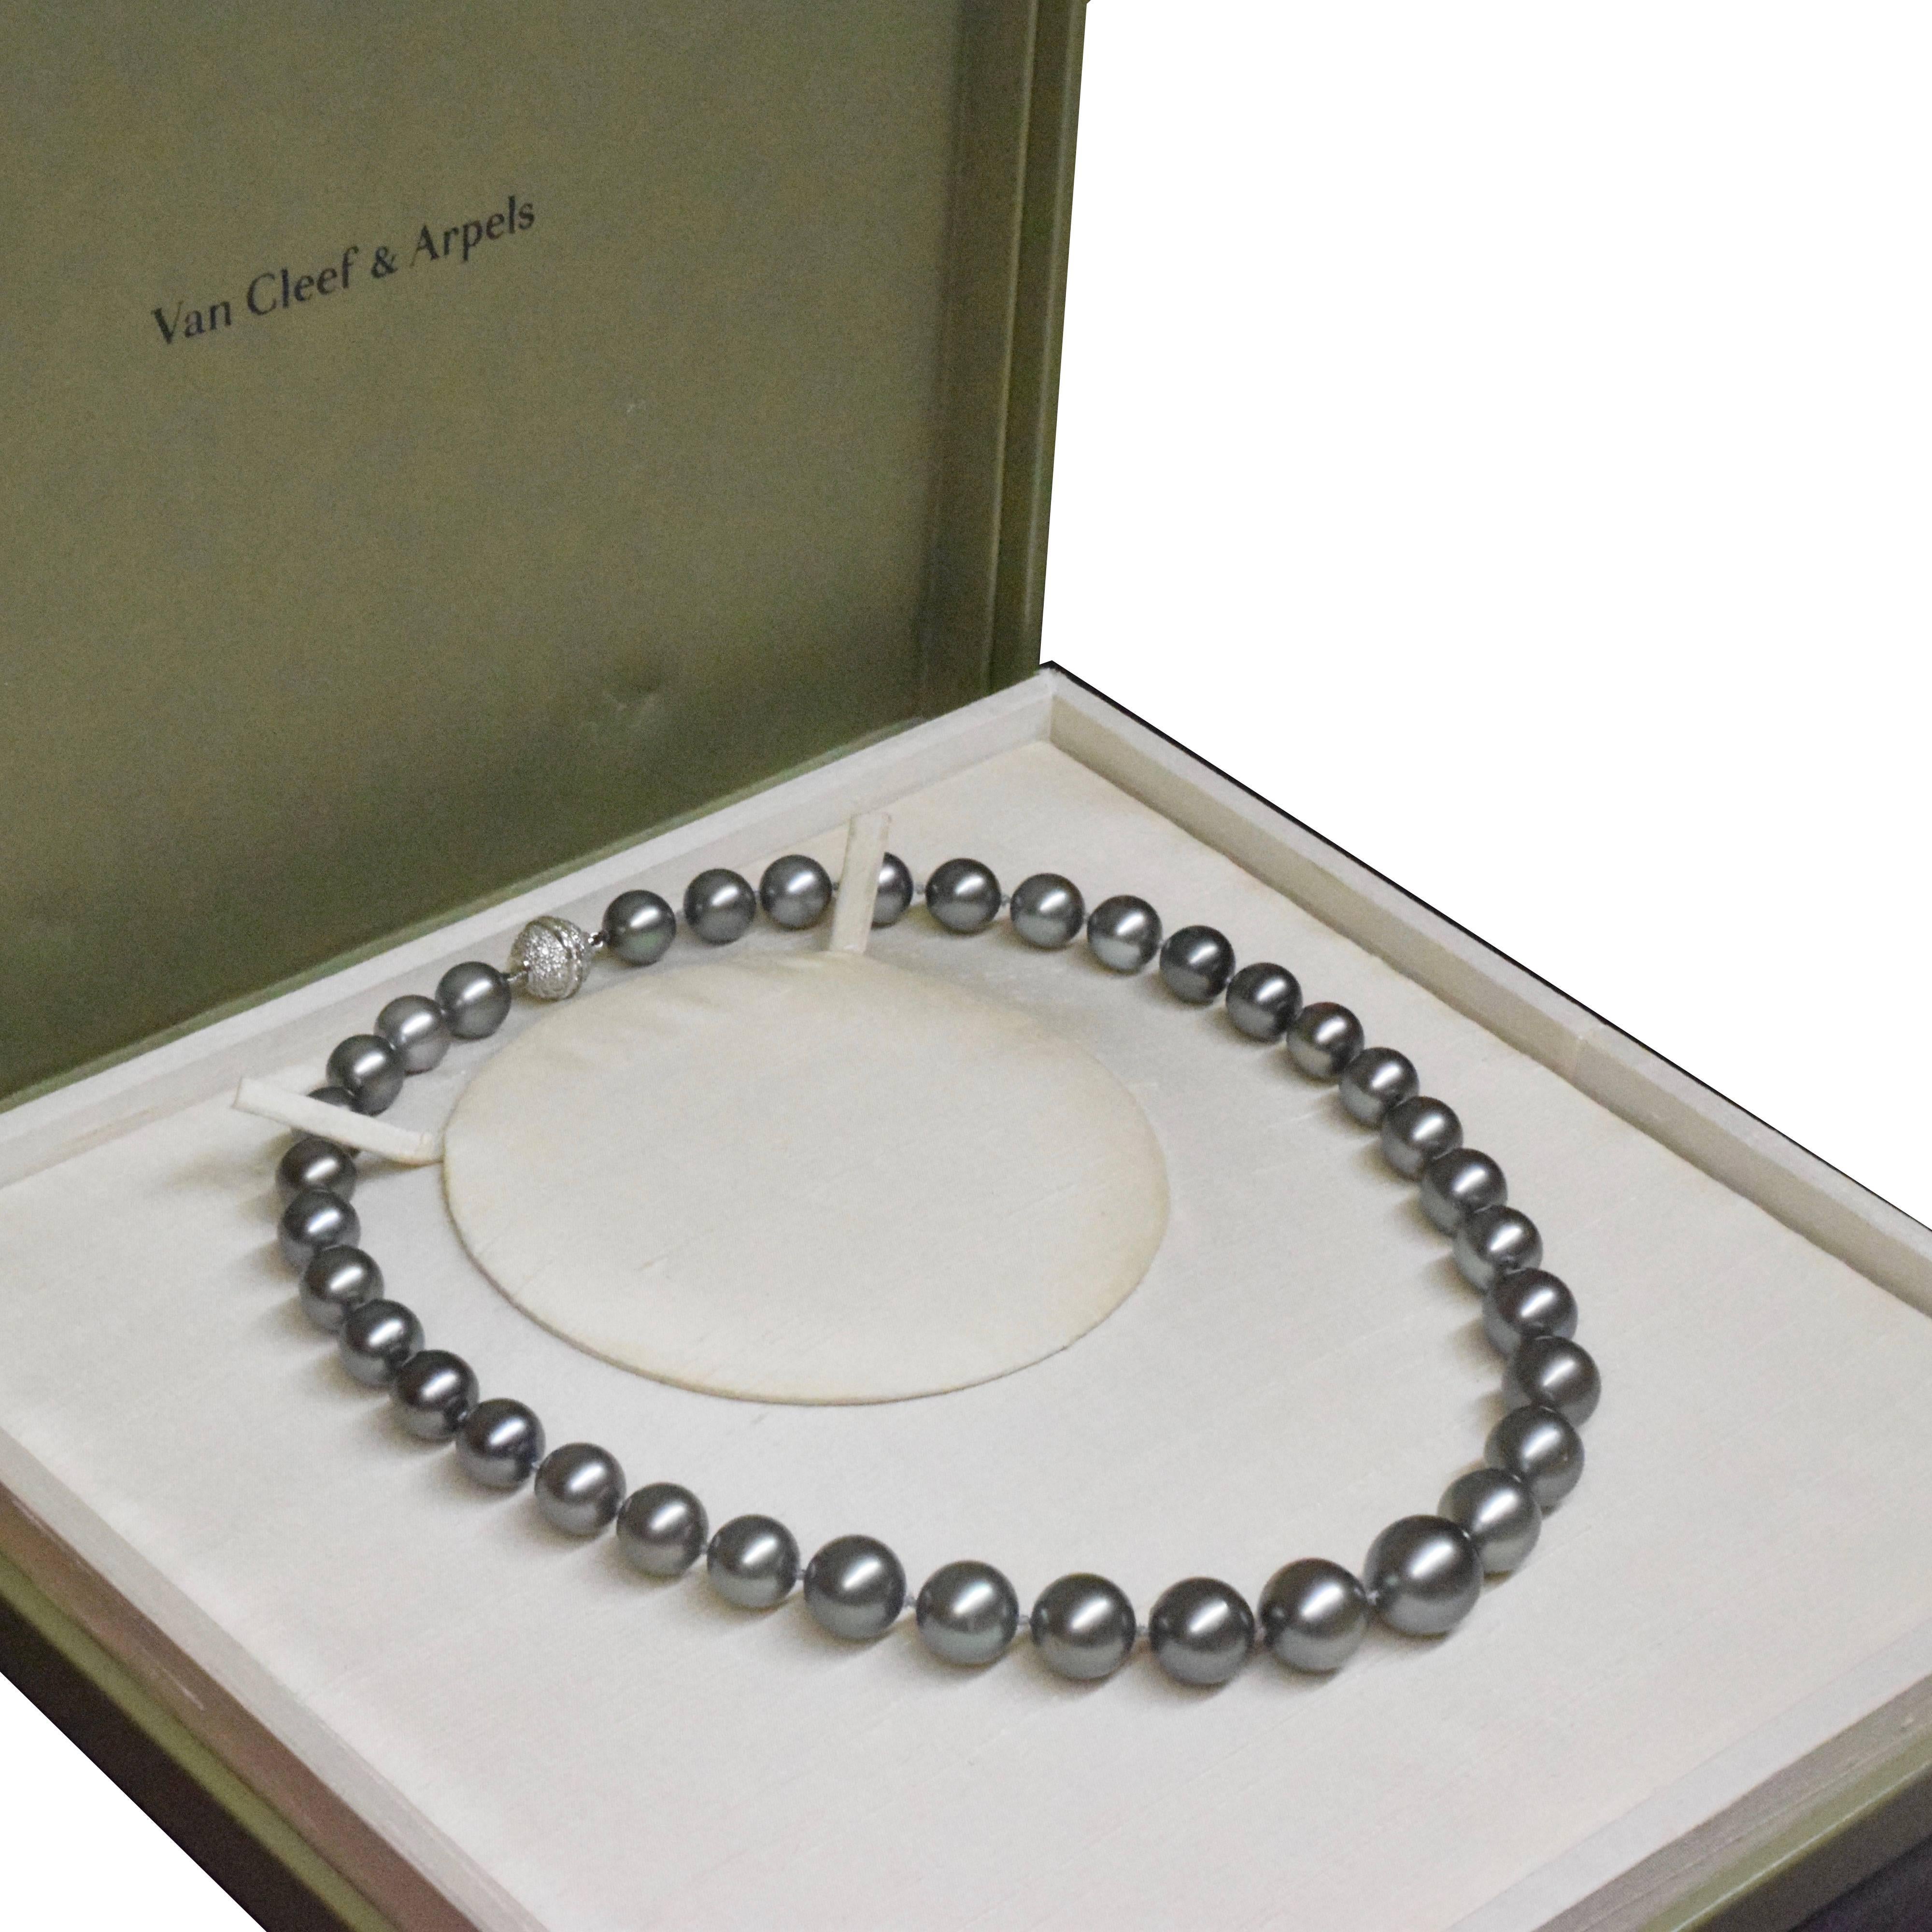 Van Cleef & Arpels Tahitian Pearl and Diamond Necklace in 18 Karat White Gold For Sale 2